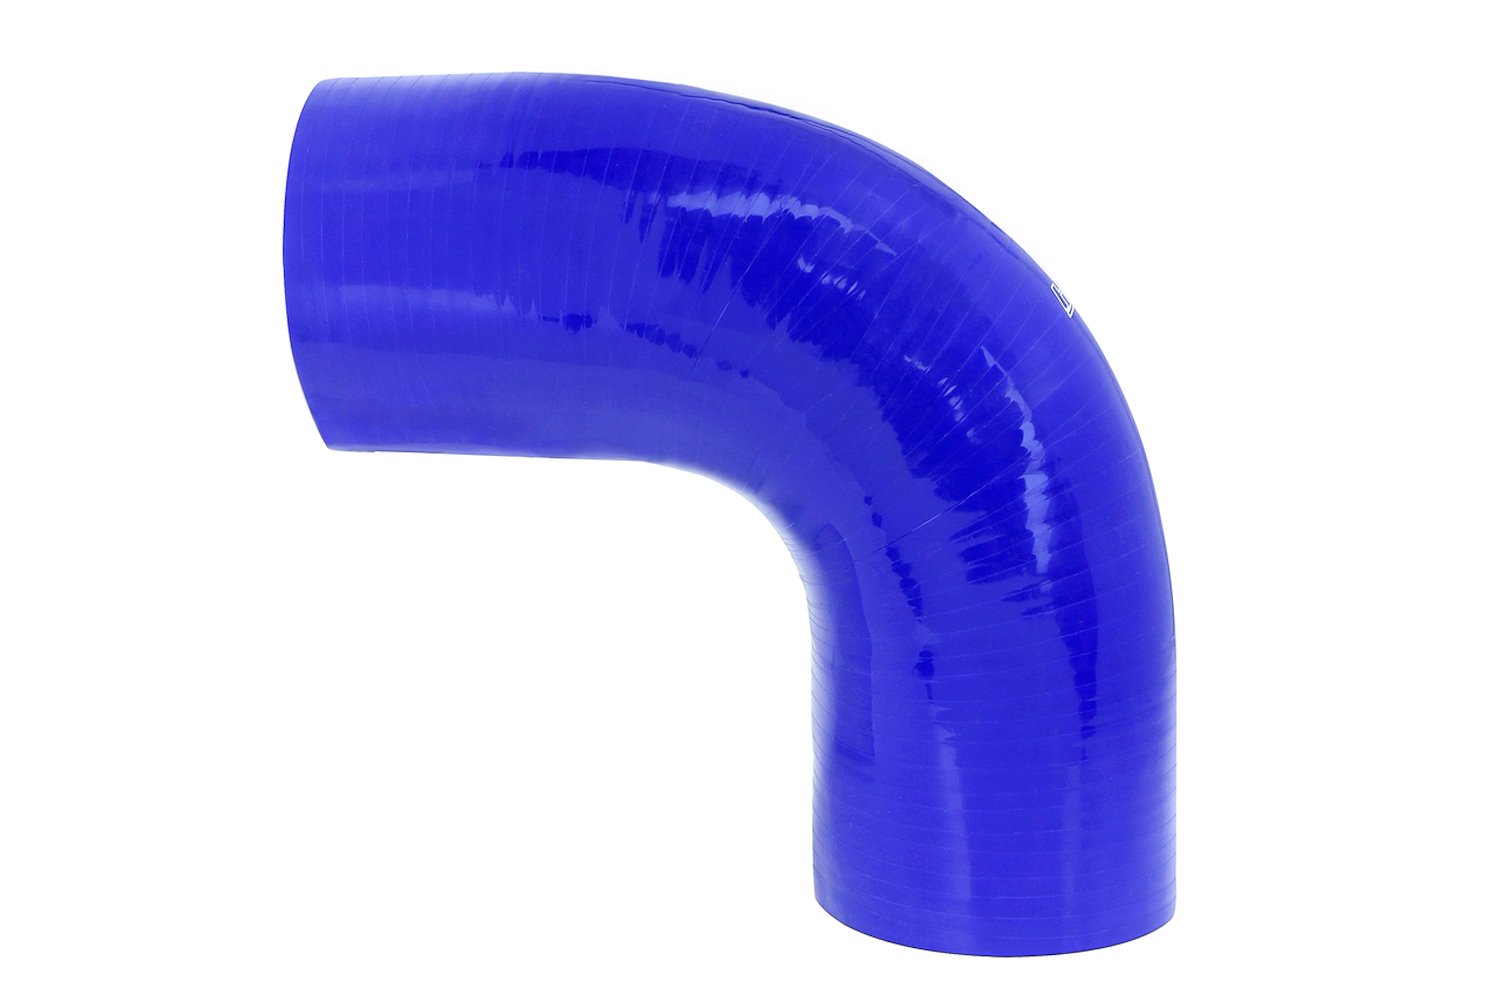 HTSEC90-375-BLUE Silicone 90-Degree Elbow Coupler Hose, High-Temp 4-Ply Reinforced, 3-3/4 in. ID, Blue